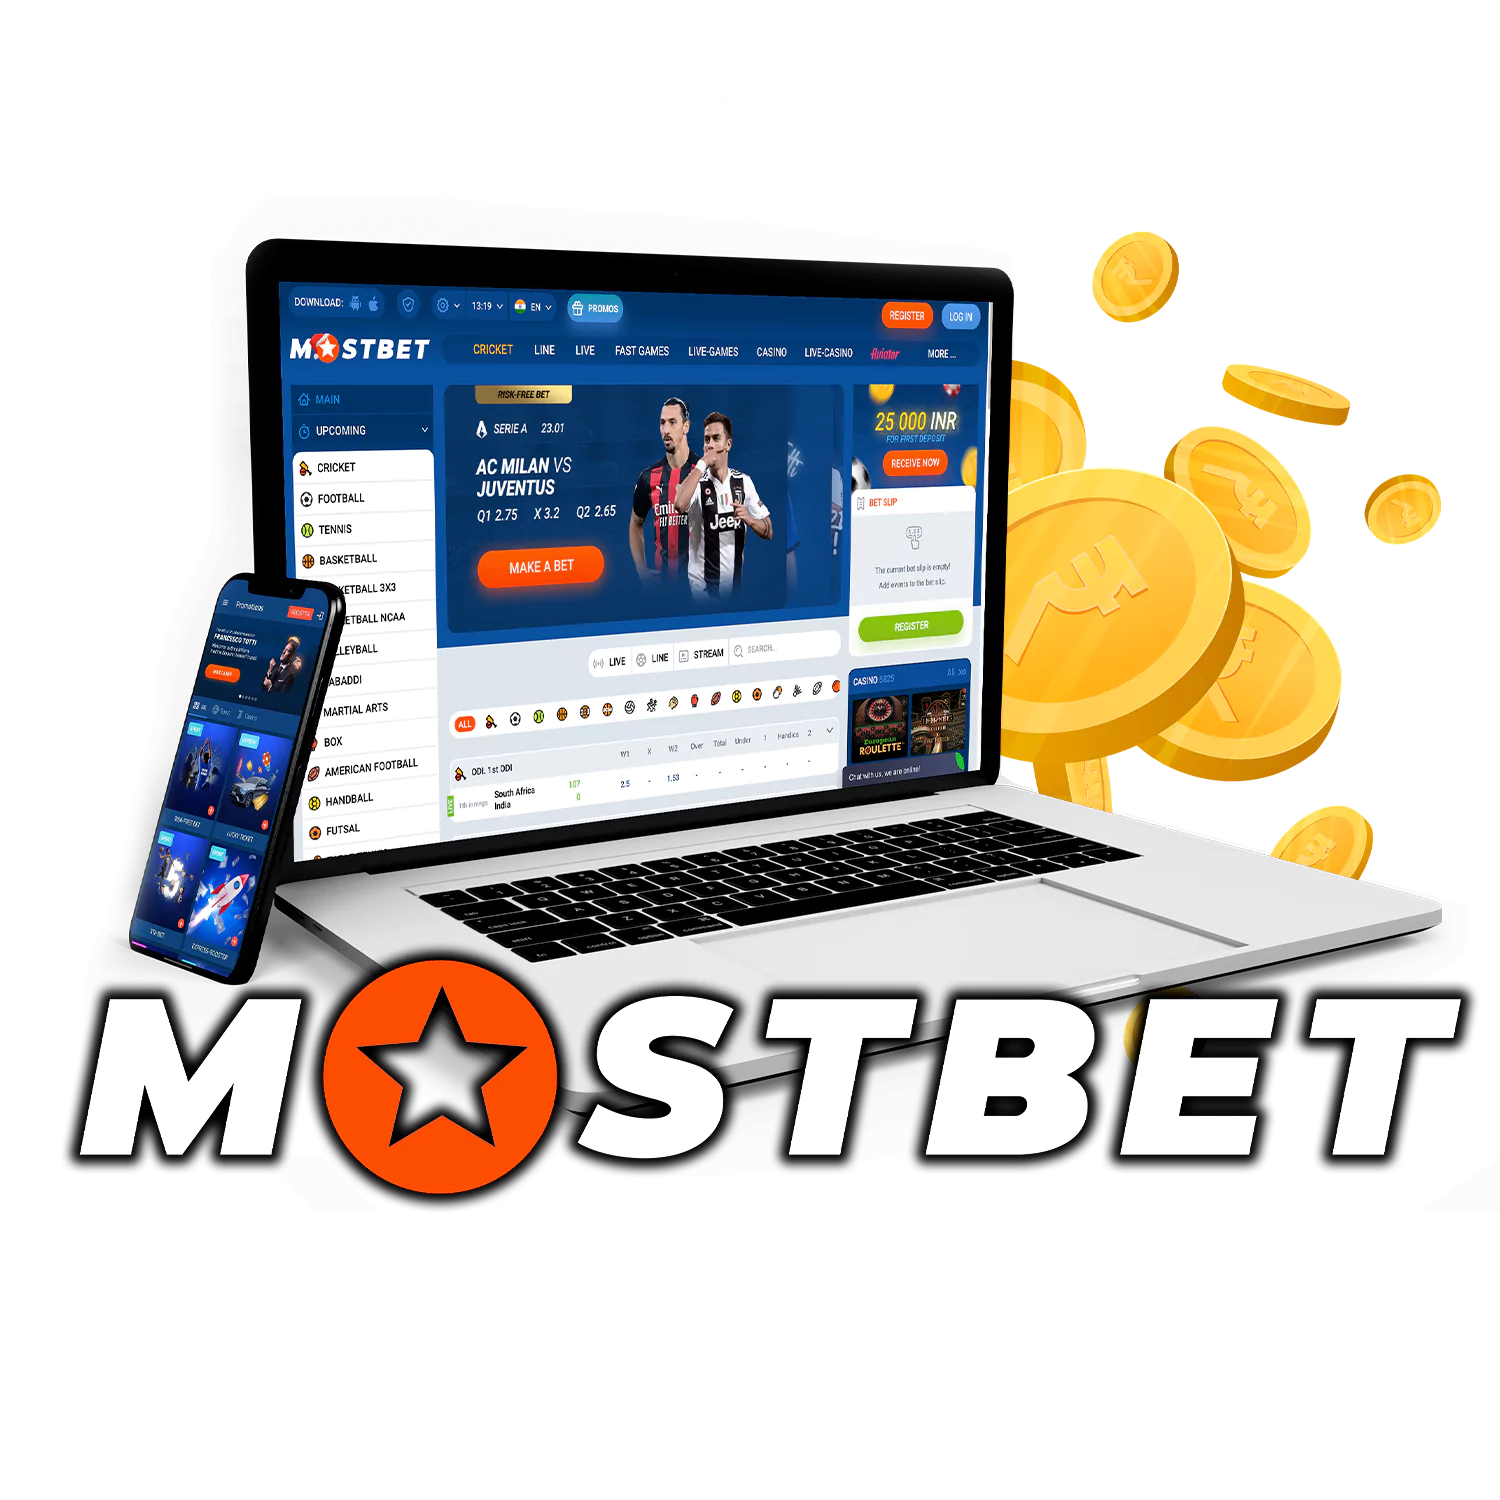 The No. 1 Mostbet Login Bangladesh stands out as a leading online betting platform in Bangladesh. With its easy access, wide range of betting options, comprehensive betting guide in 